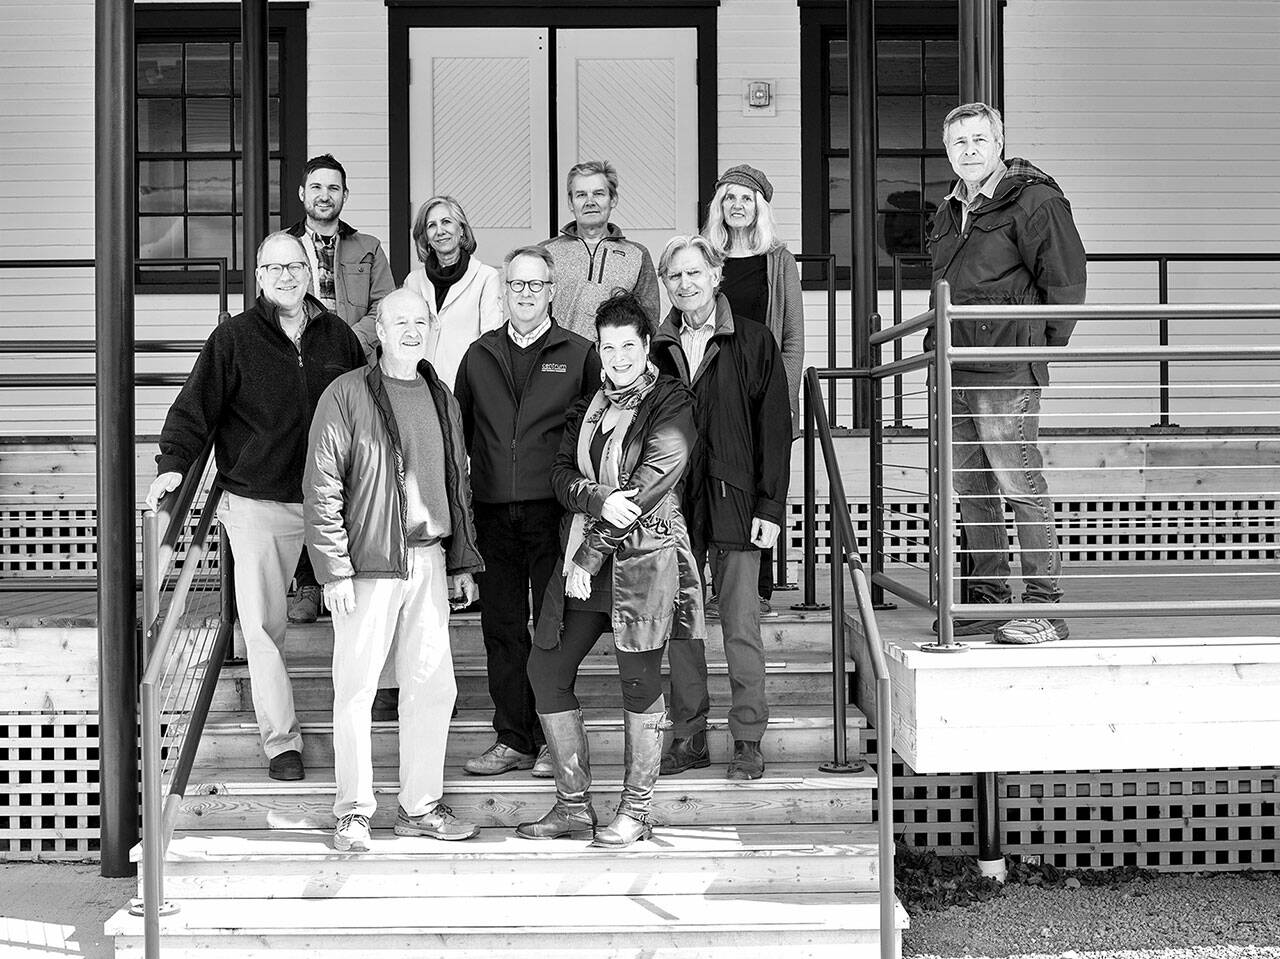 The Creative Alliance of Fort Worden members are pictured, top row, from left, Heron Scott, Port Townsend School of Woodworking; Renee Klein, Madrona MindBody Institute; Robert Ambrose and Kate Ingram, KPTZ; with, far right David Timmons, Fort Worden Public Development Authority. middle row, from left, Joseph Bednarik, Copper Canyon Press; Rob Birman, Centrum; George Knotek, Copper Canyon Press; and bottom row, from left, Randy Arent, Corvidae Press; and Teresa Verraes, Northwind Art.